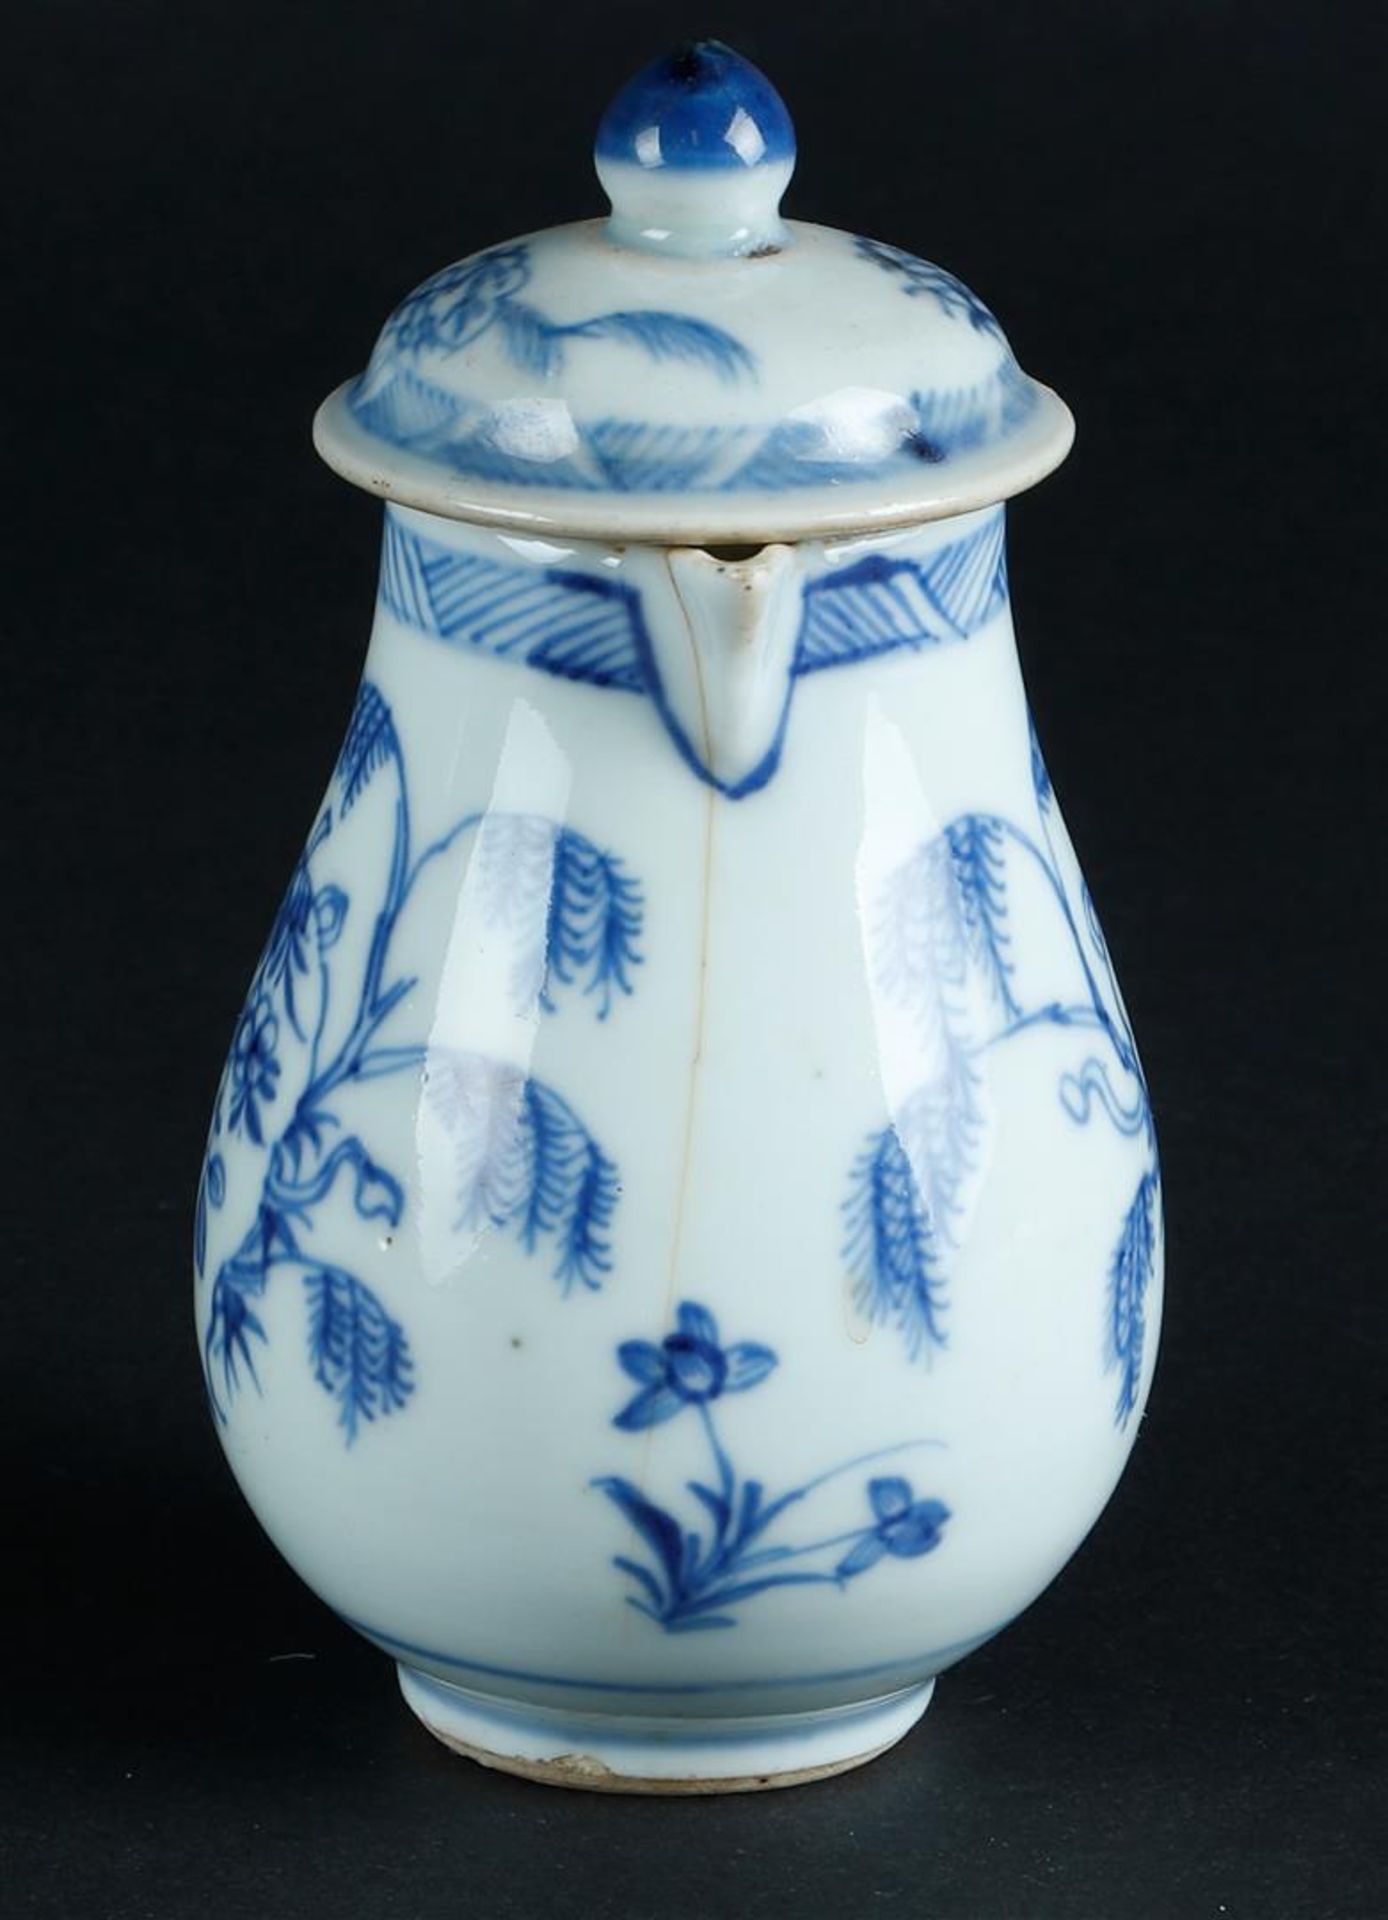 A porcelain milk jug with weeping willow (willow) decor. China, Qianlong. - Image 2 of 6